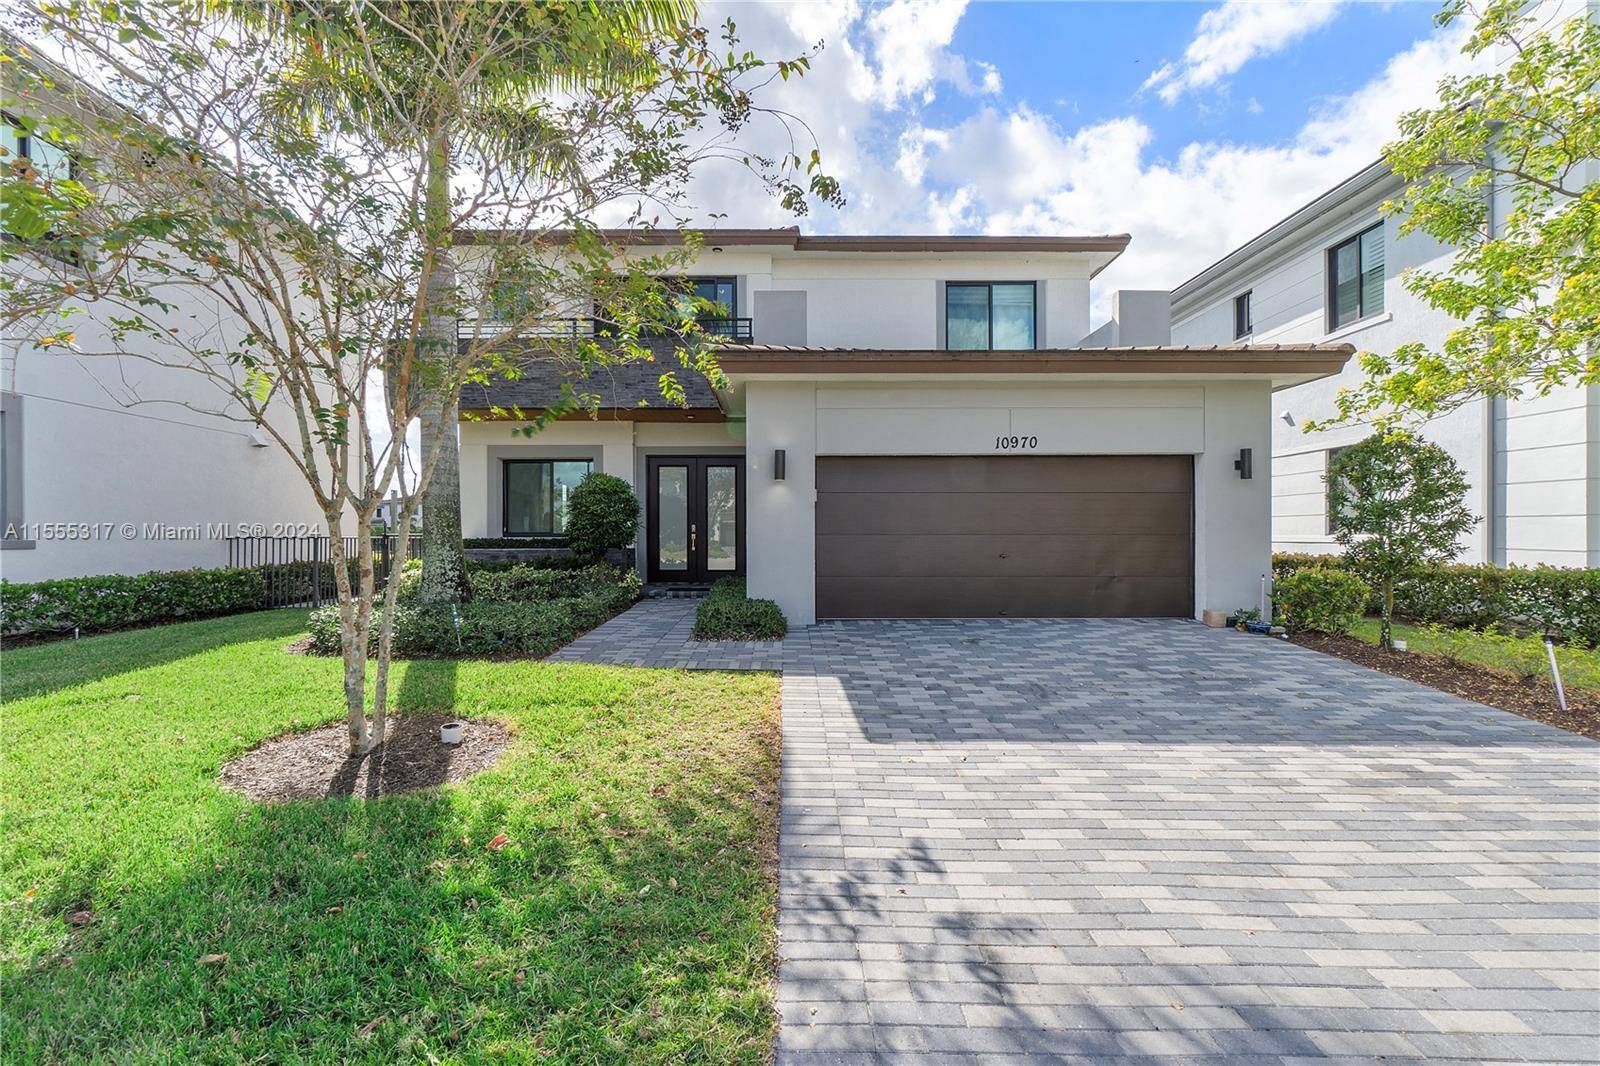 Come take a look at this stunning two story contemporary home in the luxurious guard gated community of Cascata.